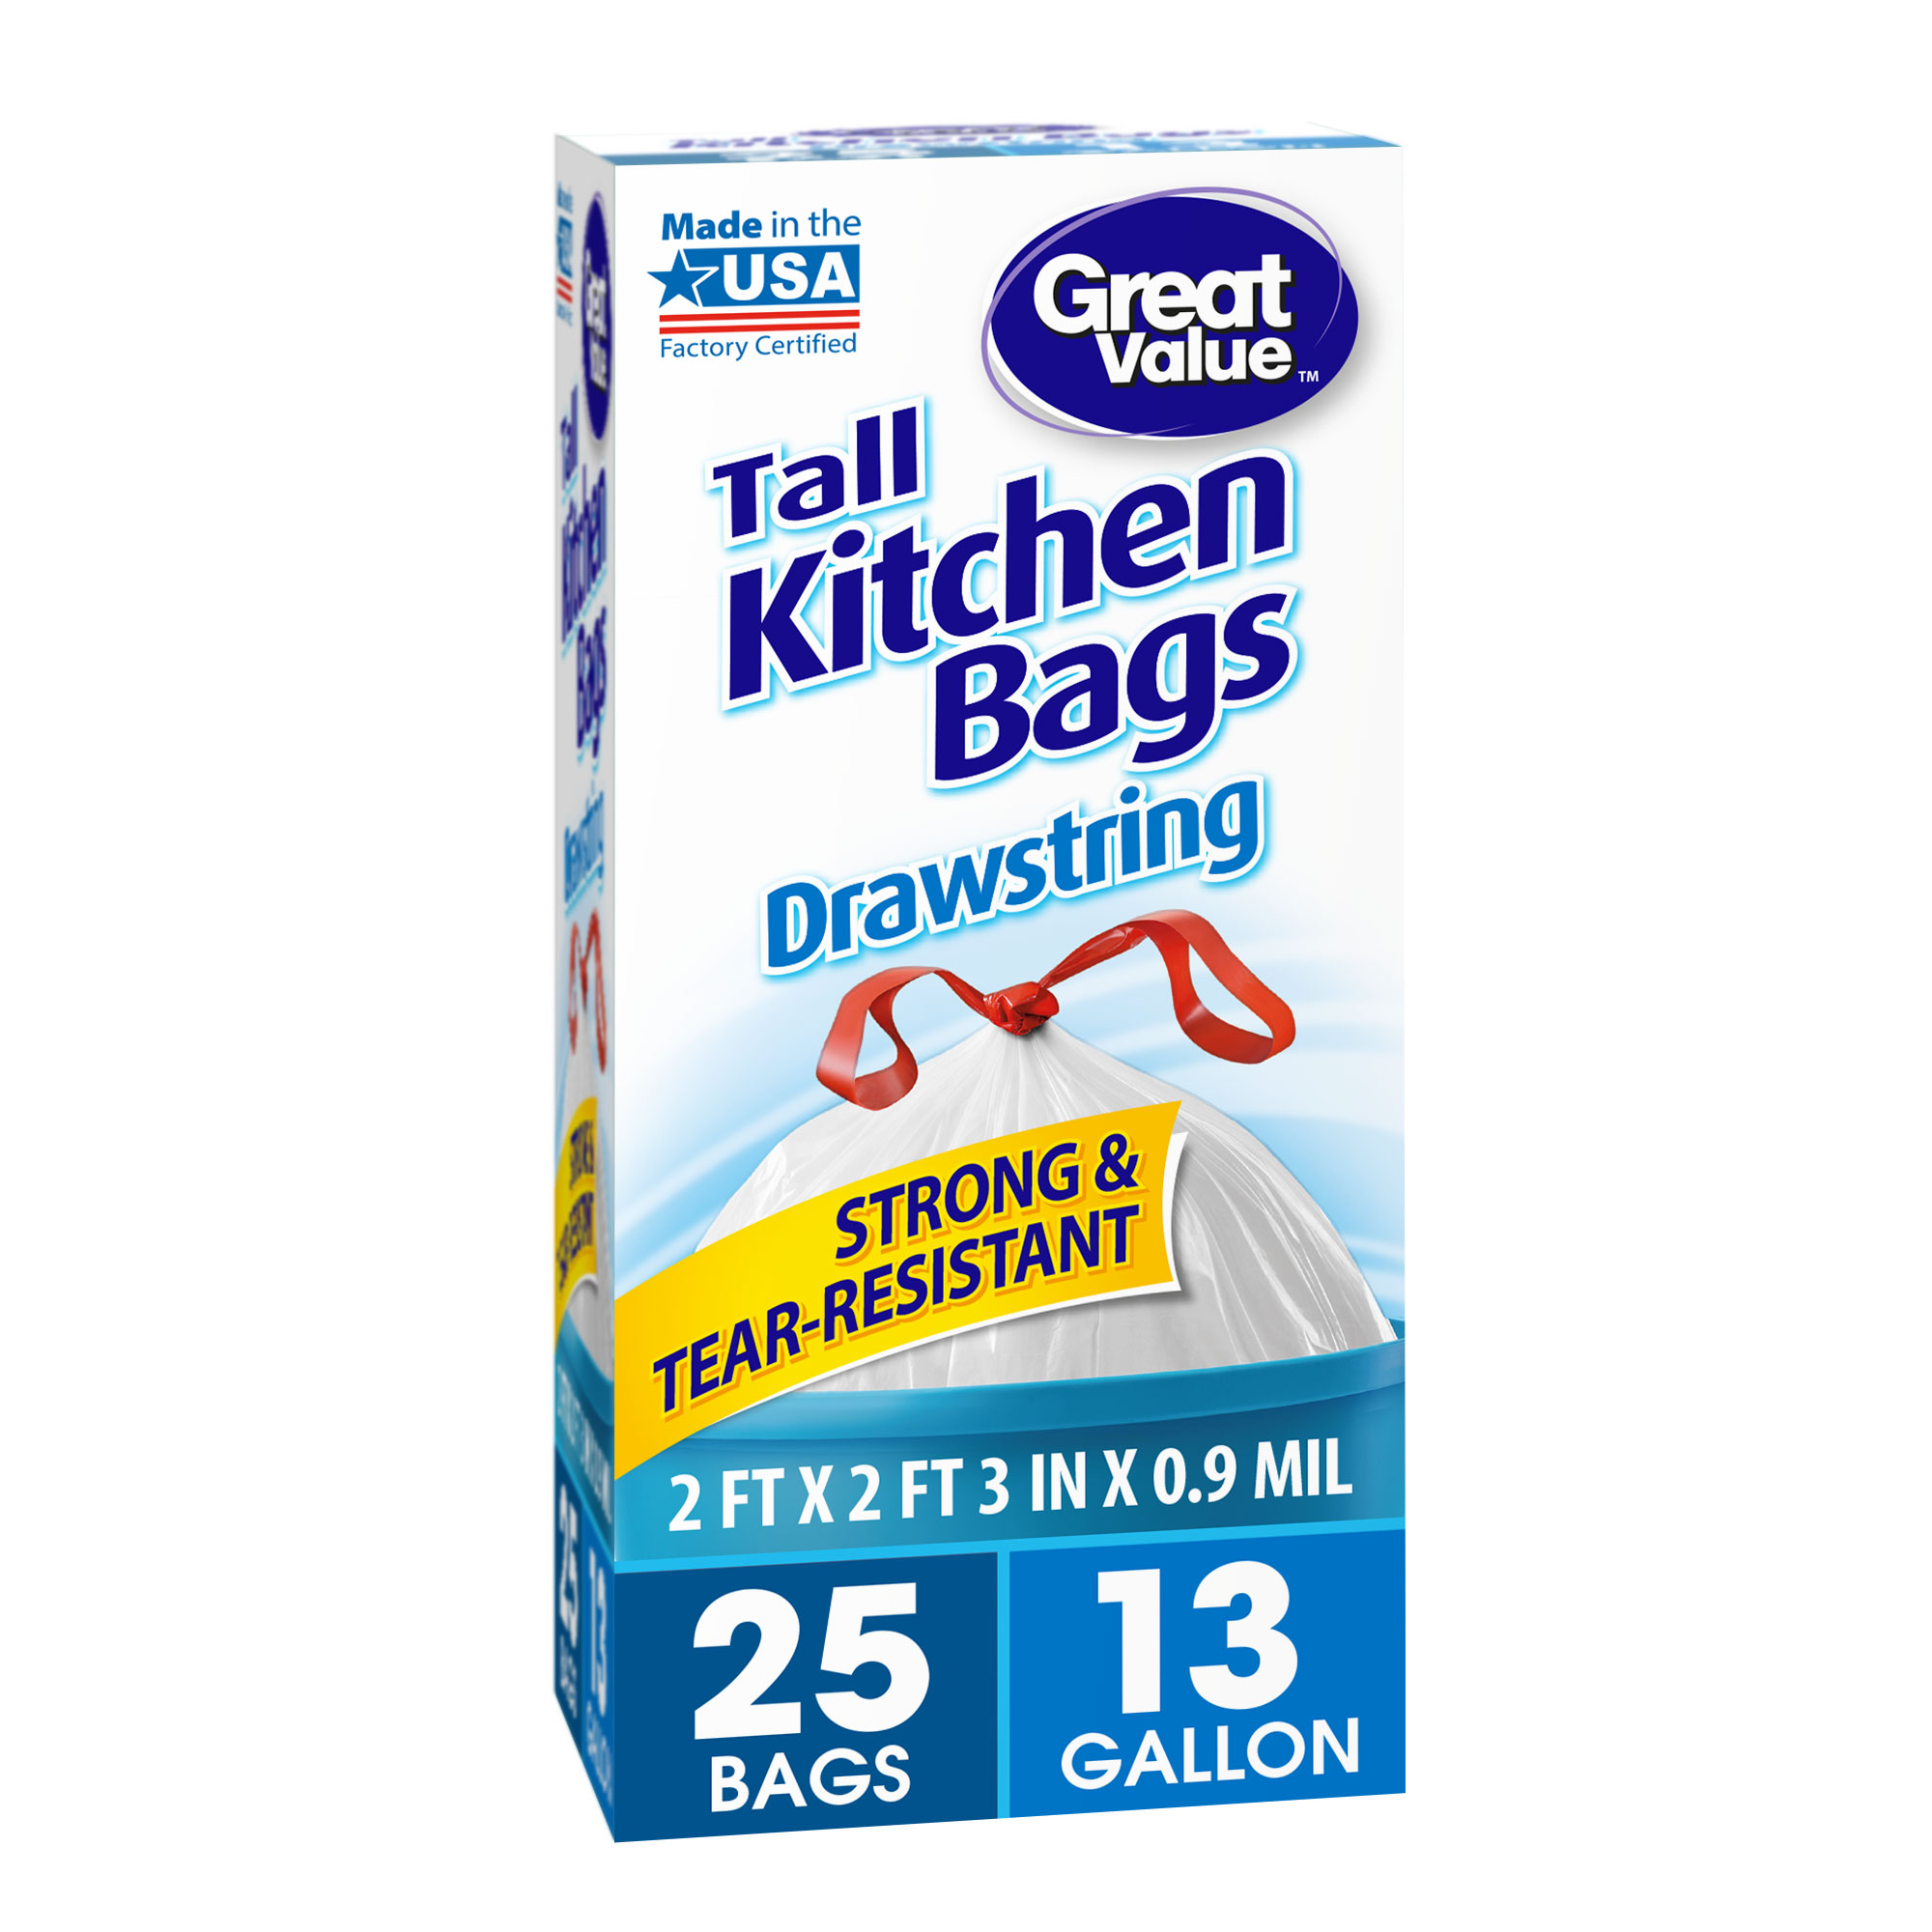 Great Value Tall Kitchen Drawstring Trash Bags, 13 Gallon, 25 Count - image 1 of 5